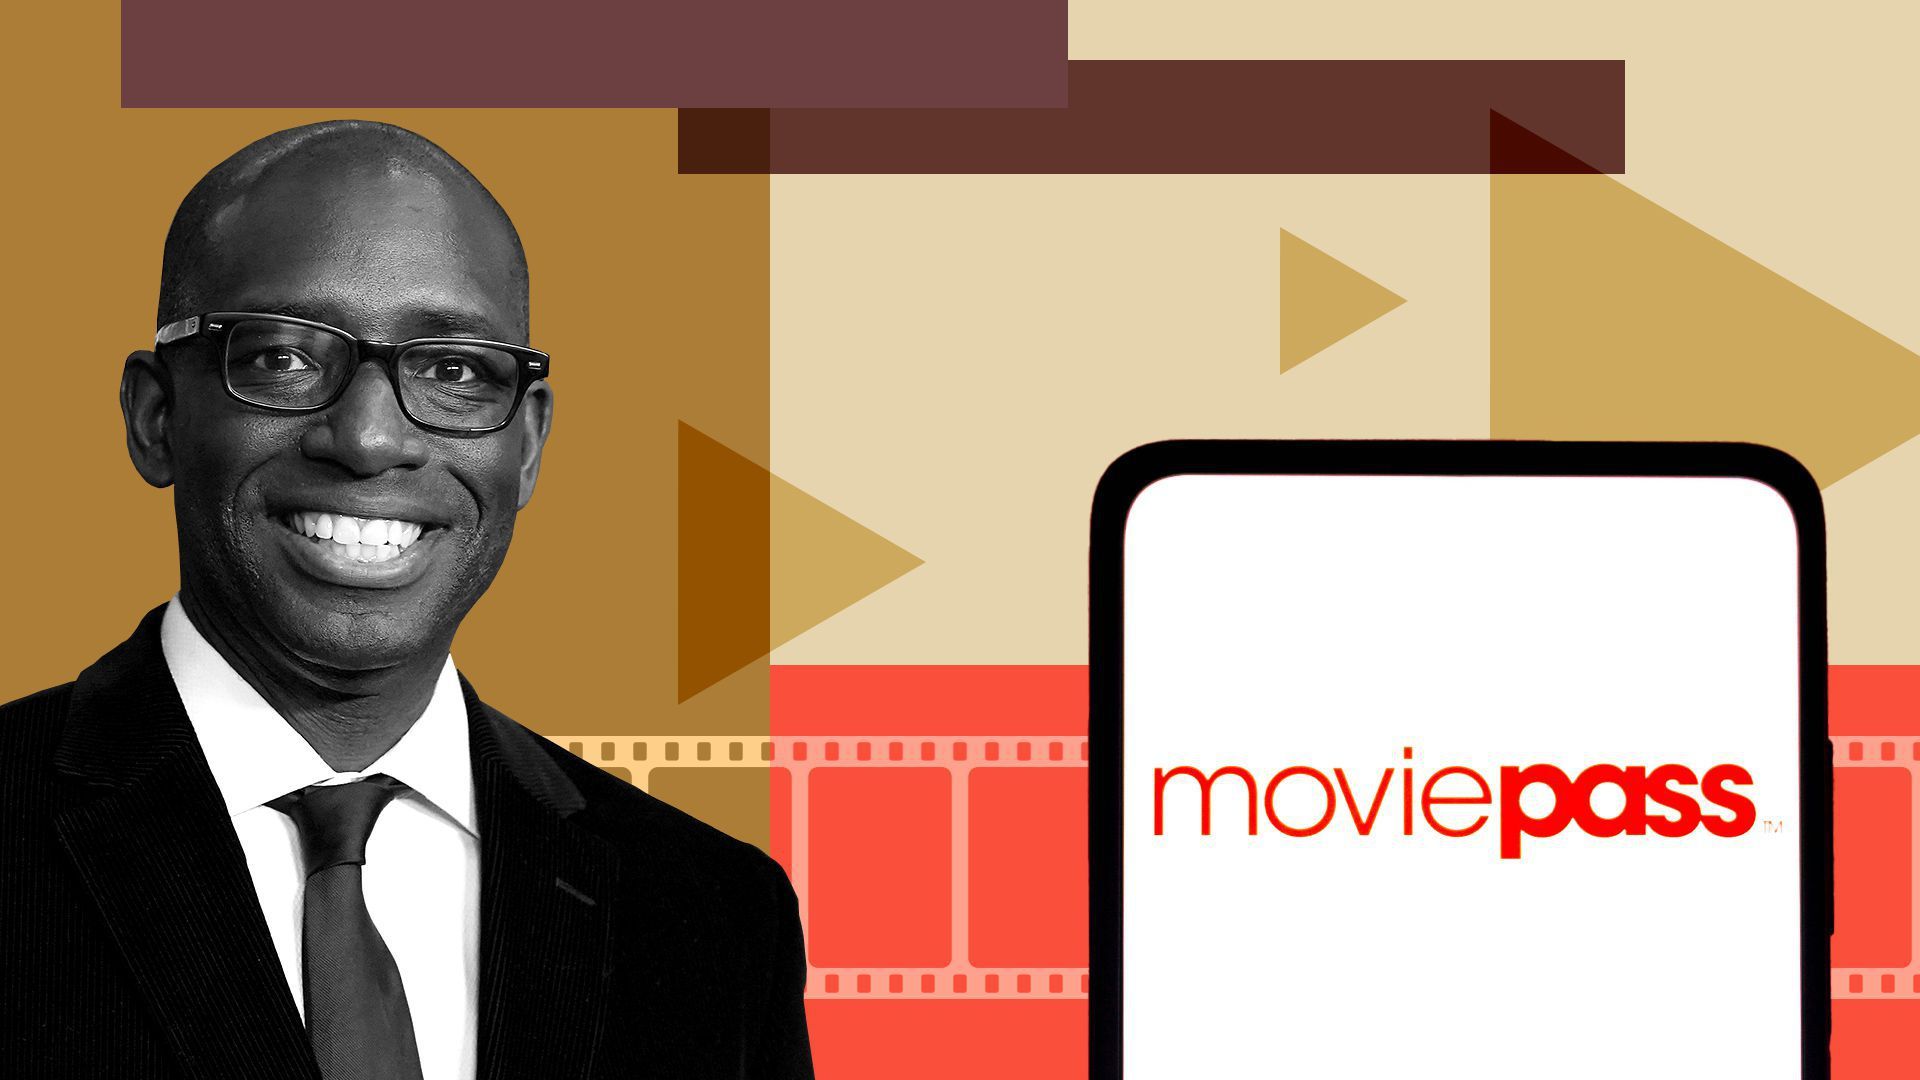 MoviePass CEO over illustrated background